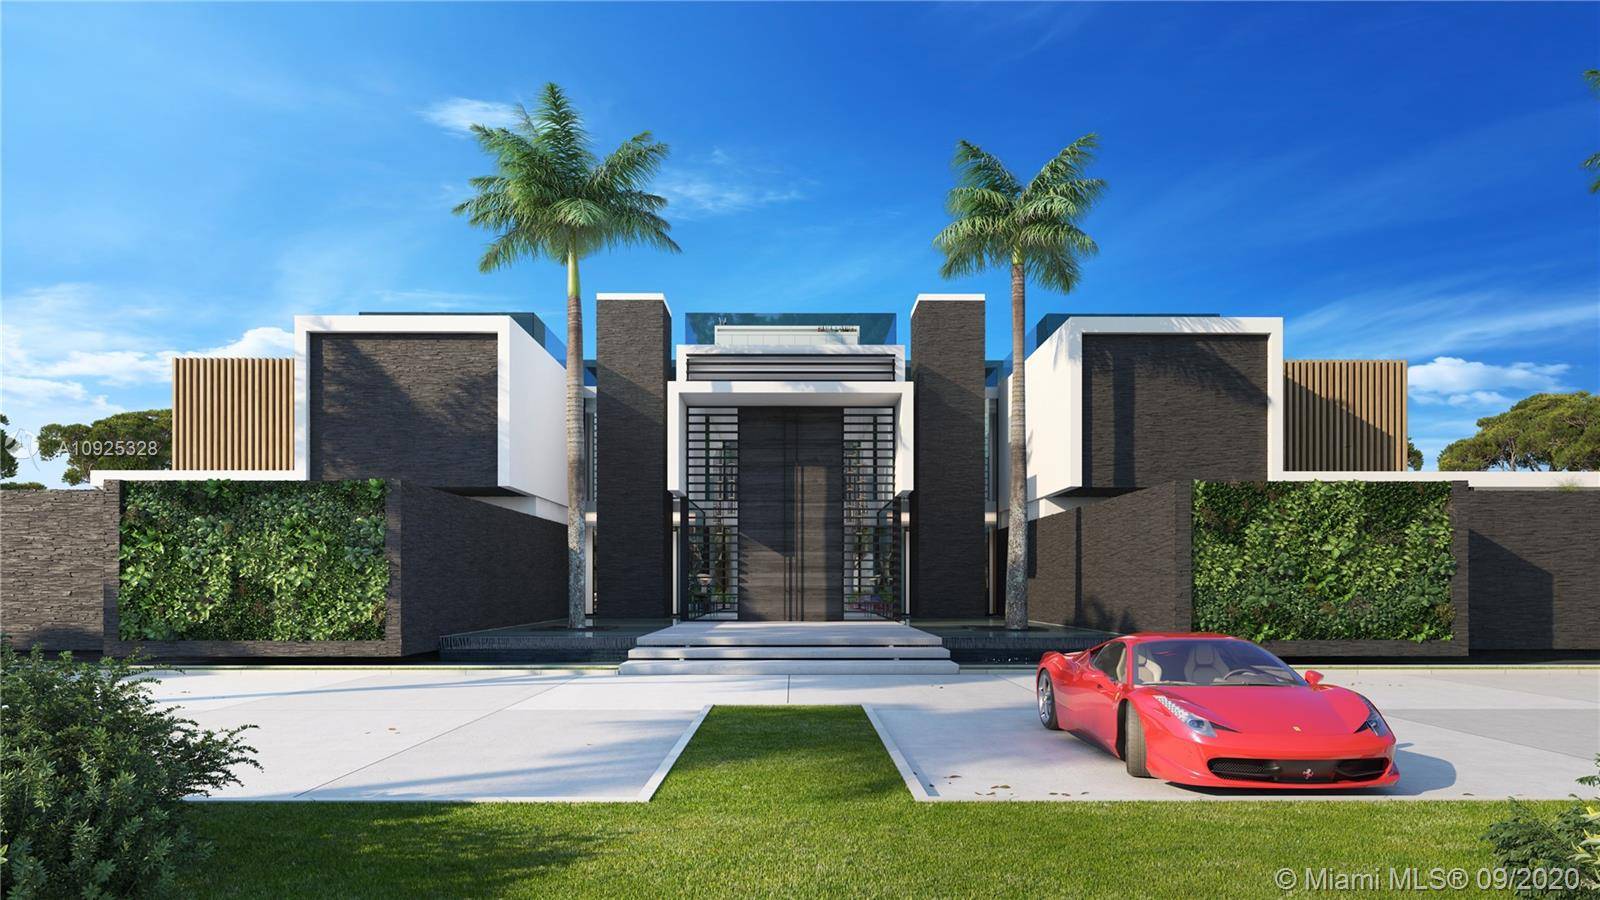 Estate E is a stunning contemporary villa being developed in the ultra luxury private gated community of AKAI Estates.